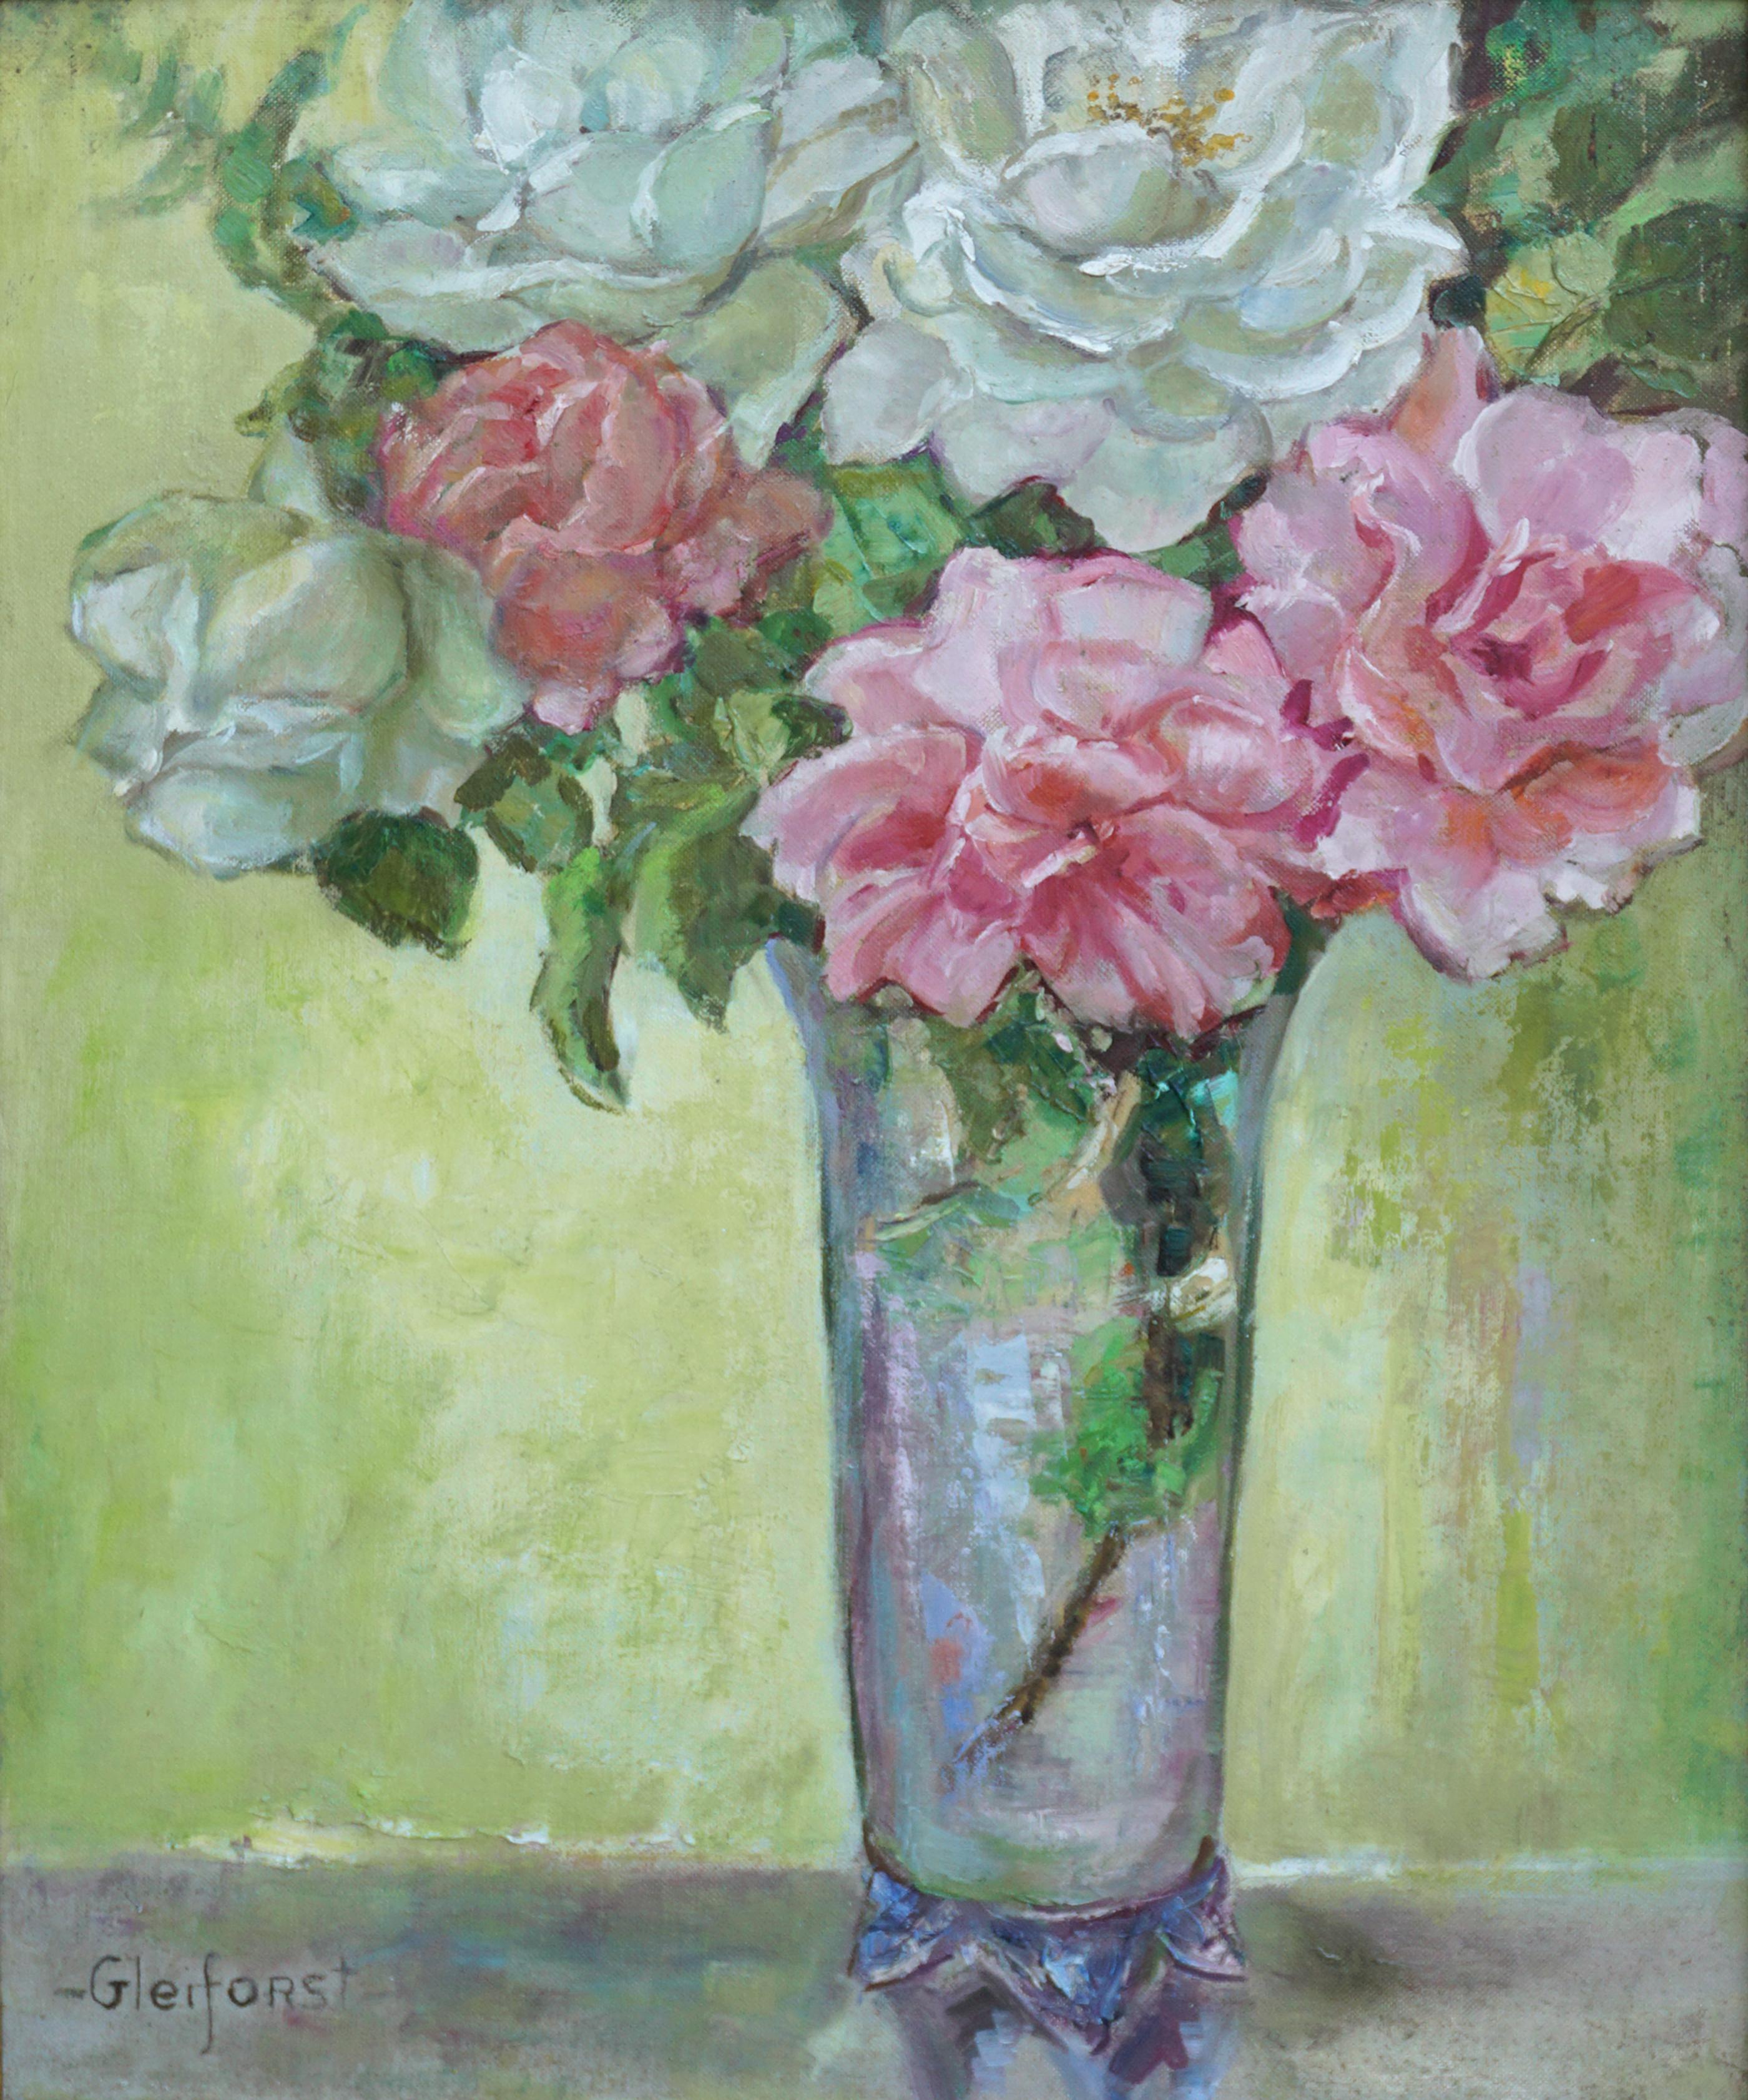 Mid Century Pink & White Roses in Crystal Vase Still-Life - Painting by Helen Enoch Gleiforst